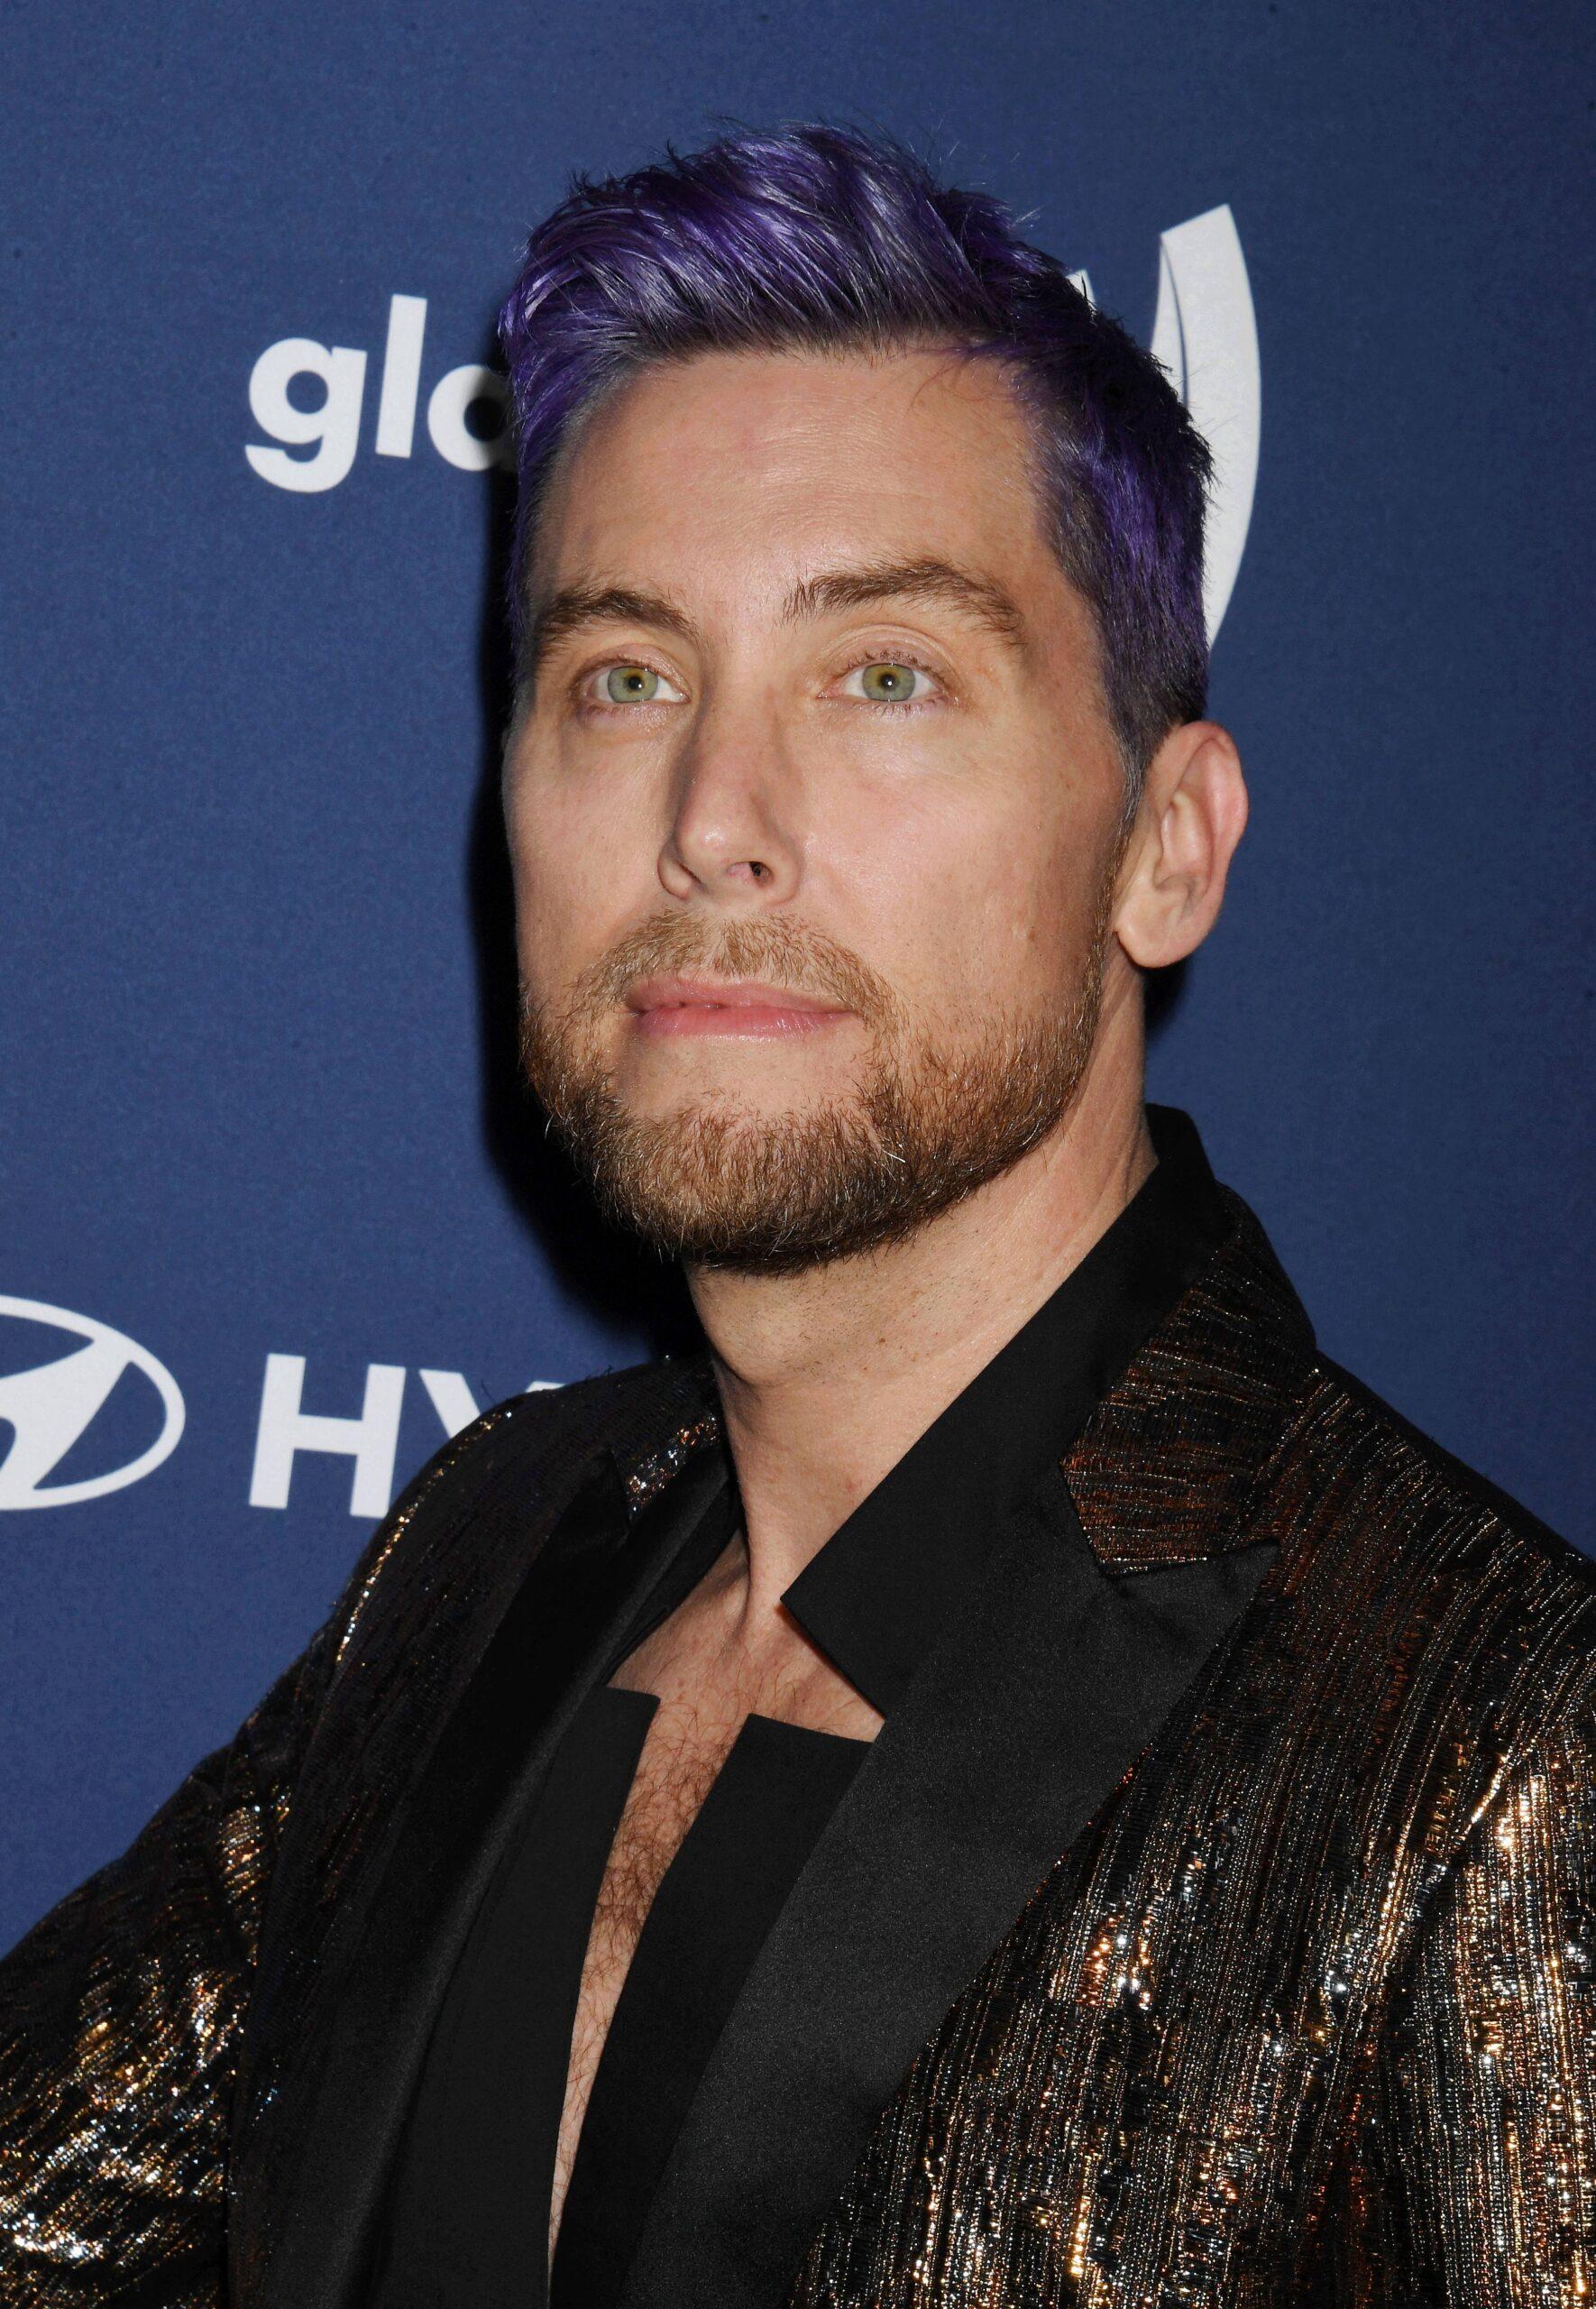 Lance Bass at the 34th Annual GLAAD Media Awards Los Angeles - Arrivals